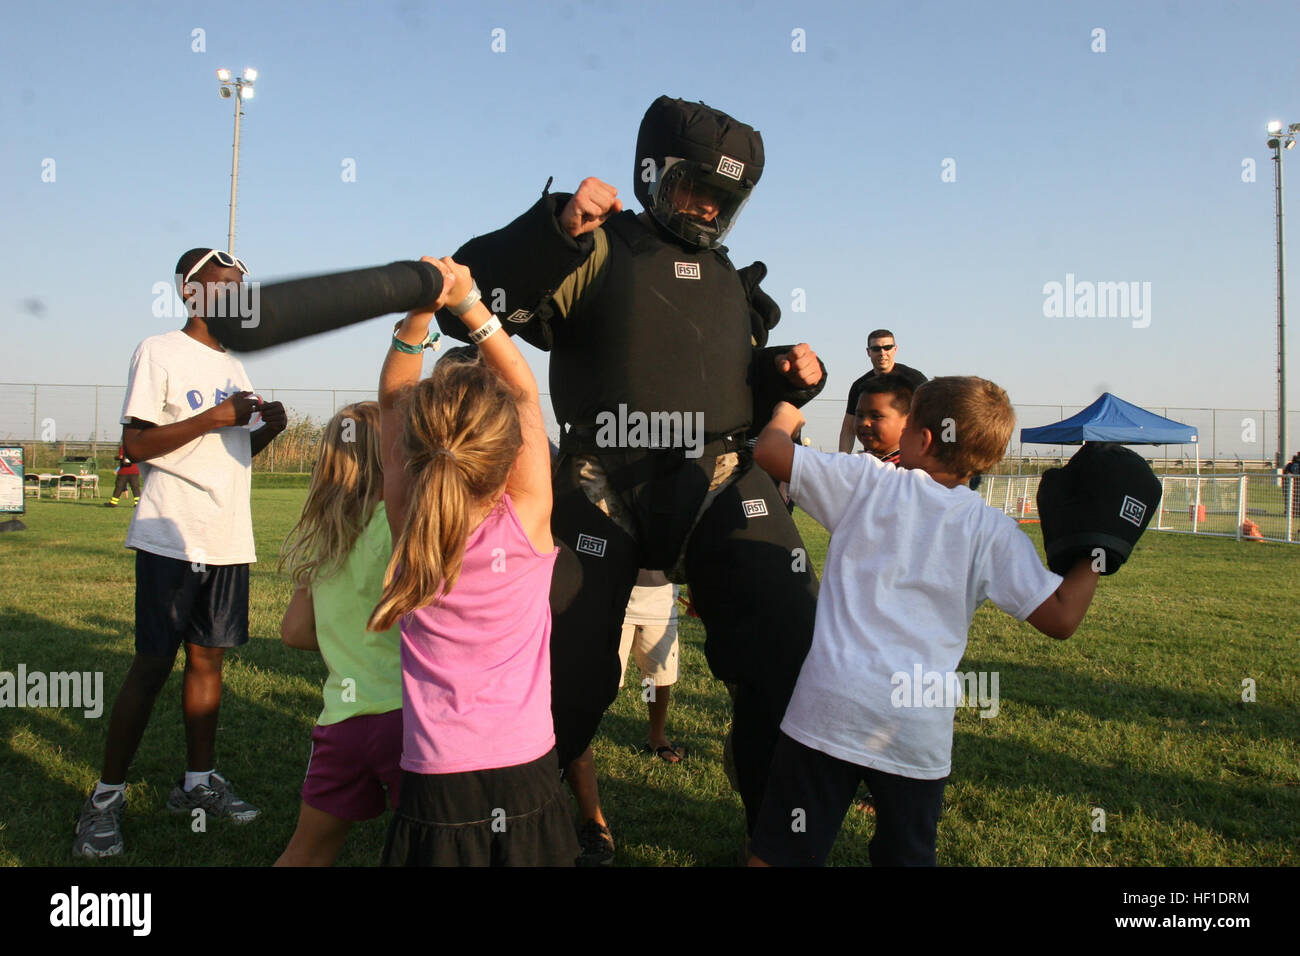 Purpose Marine-Air Ground Task Force Africa 13, demonstrates the resilience of riot gear while children strike him with batons at the National Night Out event aboard Naval Air Station Sigonella, Italy, Aug. 6, 2013. Marines and sailors with Special-Purpose MAGTF Africa participated in the event with a static display of weapons, both lethal and non-lethal. Special-Purpose MAGTF Africa continues to build relationships with the community while simultaneously strengthening U.S. Africa Command and U.S. Marine Corps Forces Africa's ability to assist partner nations in addressing security challenges  Stock Photo